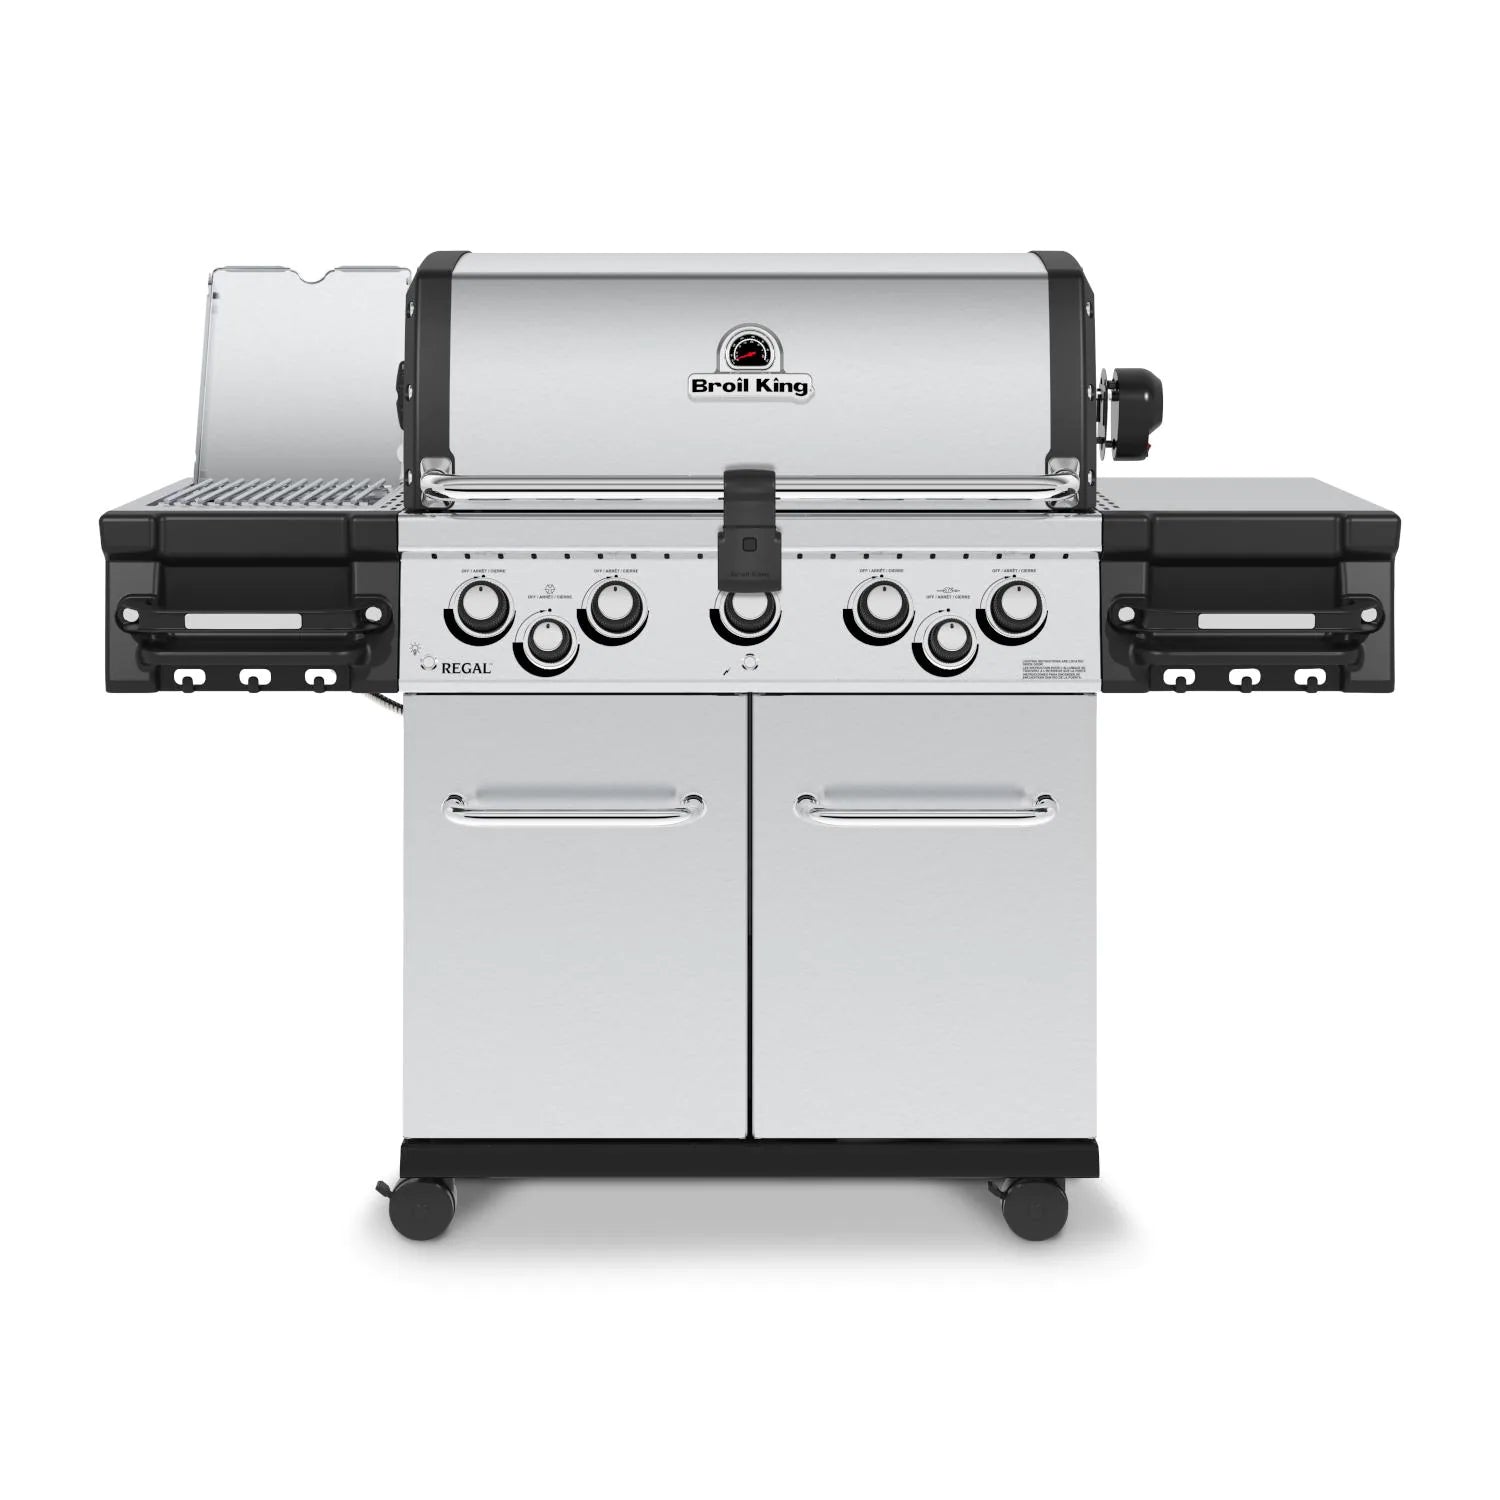 Broil King 958944 Regal S 590 PRO IR 5-Burner Propane Gas Grill With Rotisserie & Infrared Side Burner - Stainless Steel